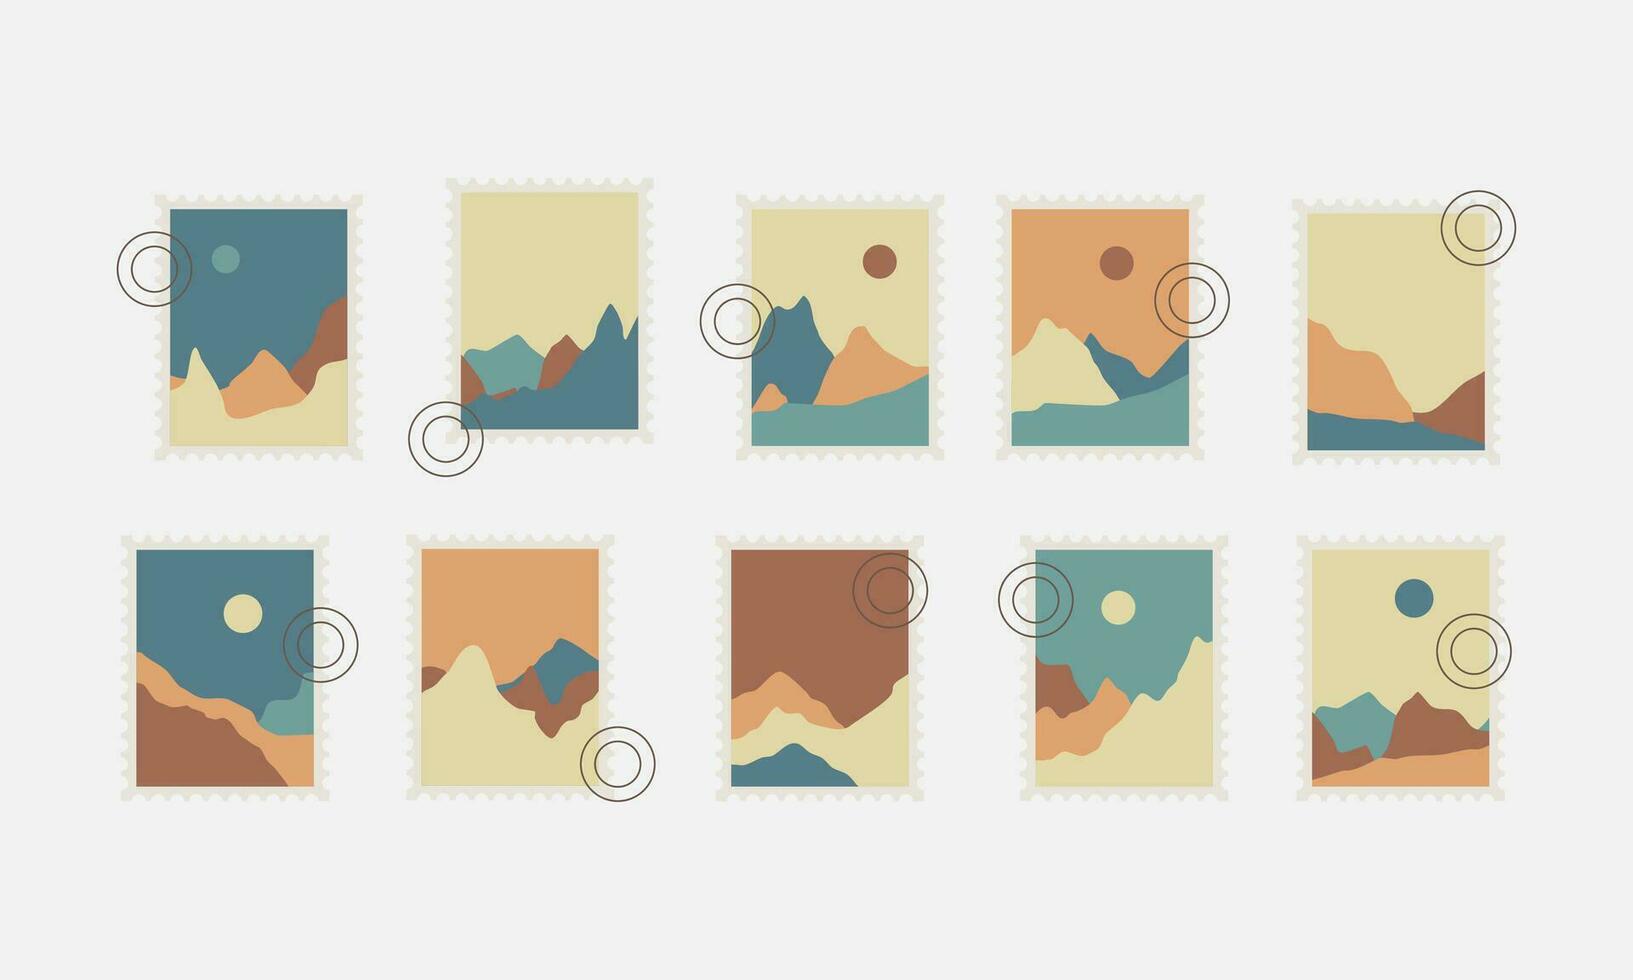 Set of postal stamps and postmarks, isolated on white background, vector illustration.